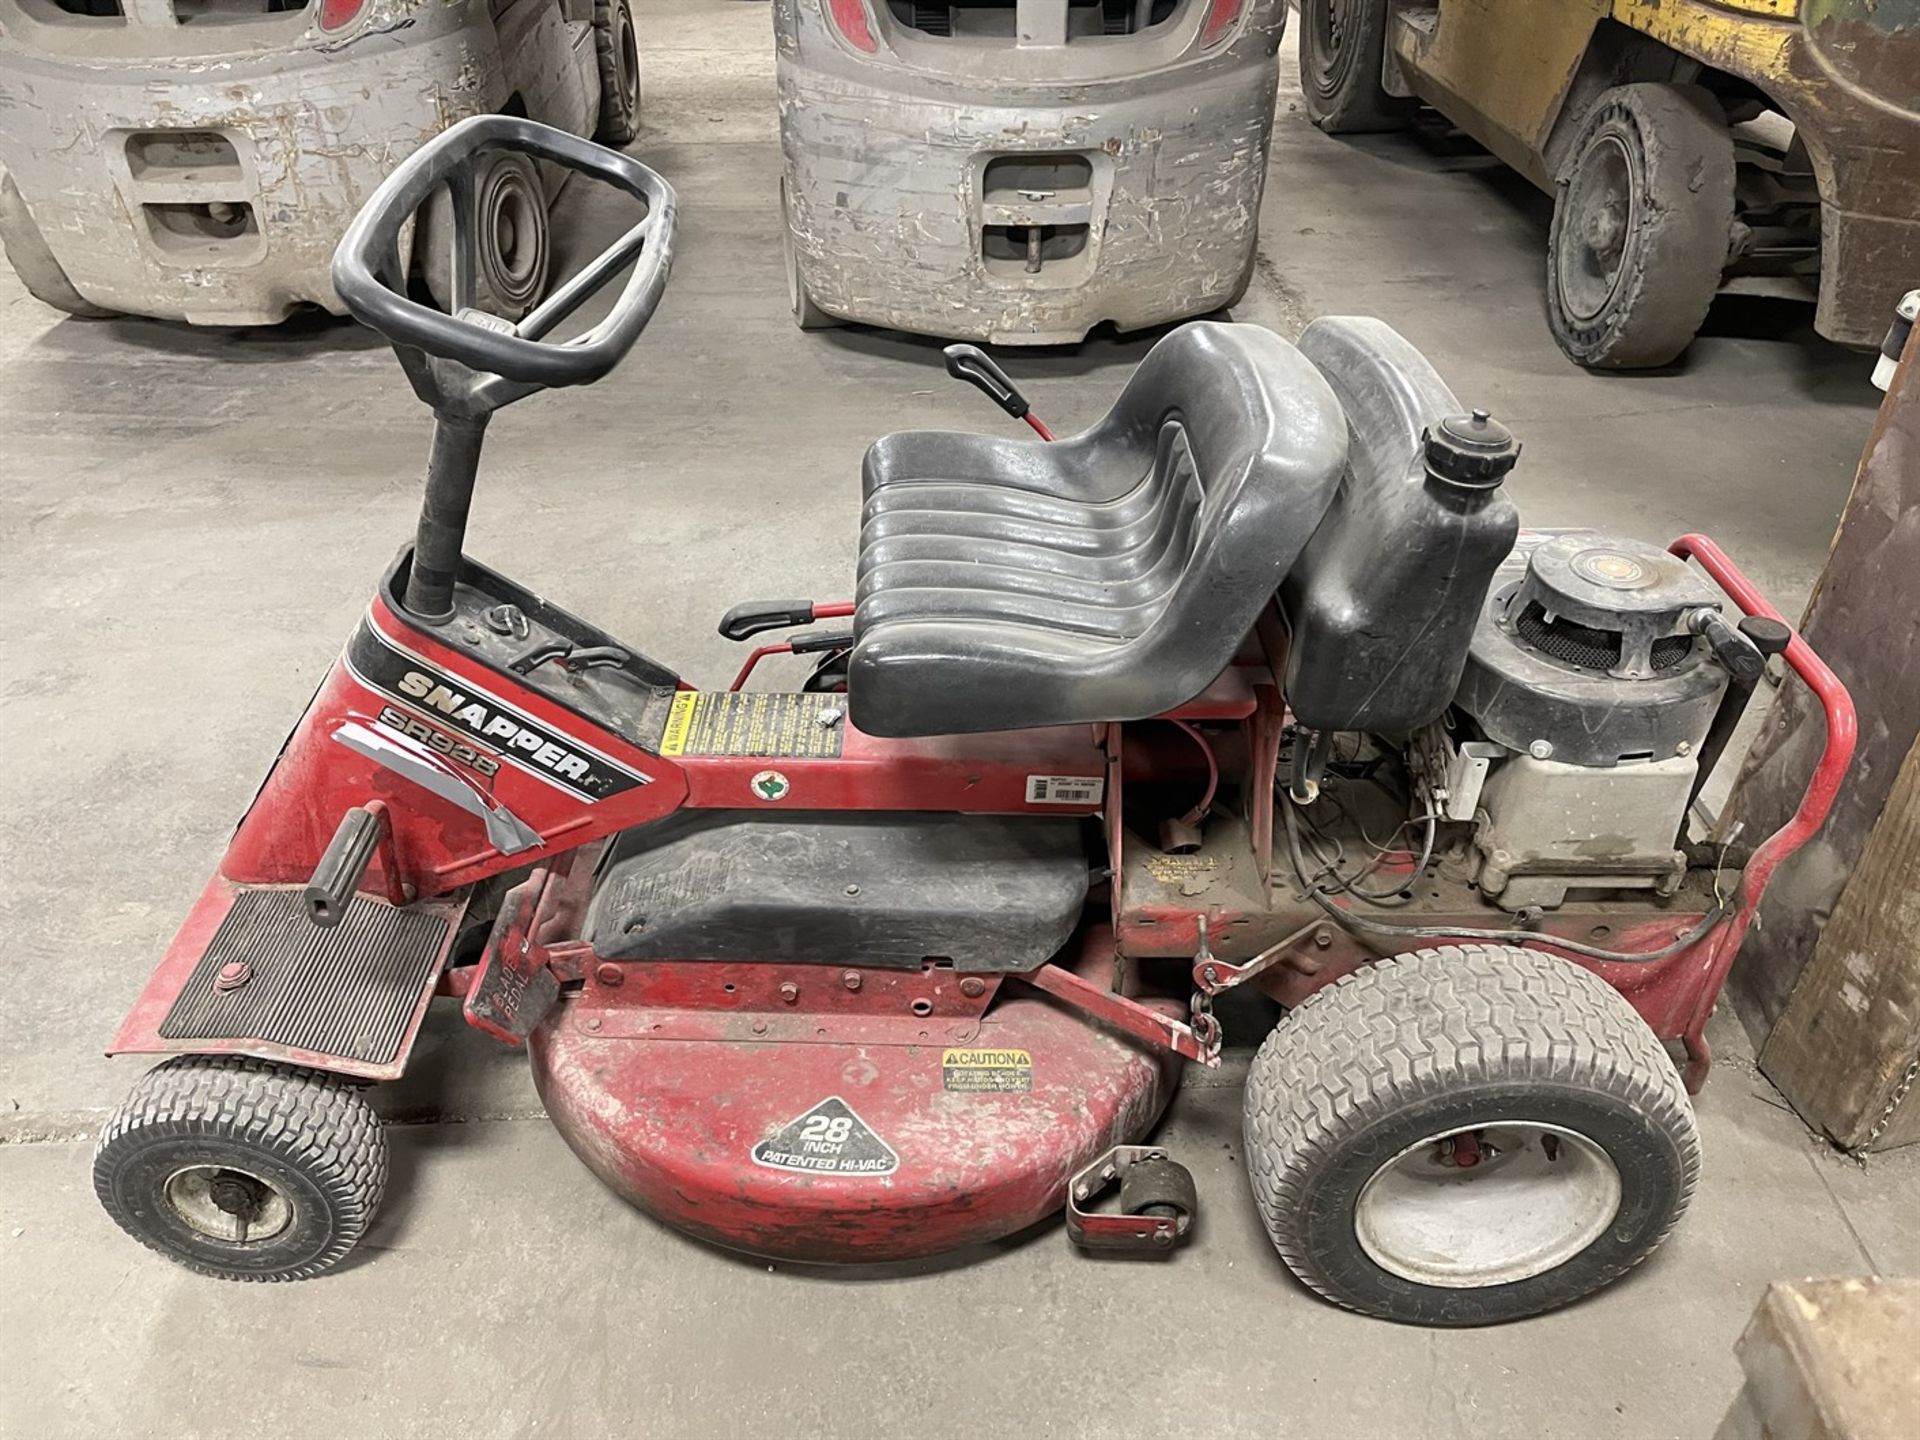 Snapper SR928 Riding Lawn Mower, 8 HP Briggs & Stratton Engine, 28" Capacity - Image 5 of 8